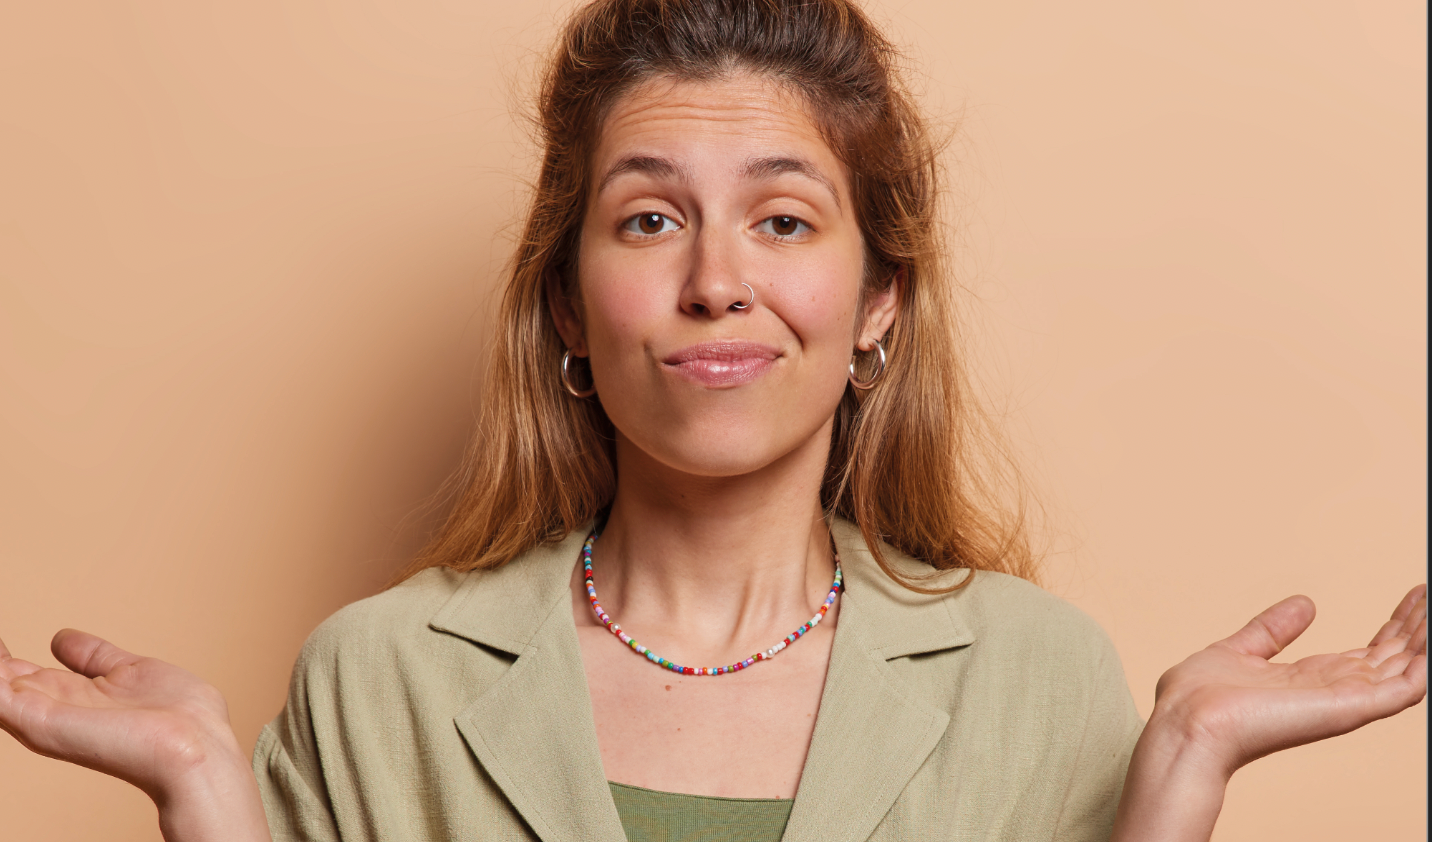 a woman wearing a necklace and earrings is shrugging her shoulders